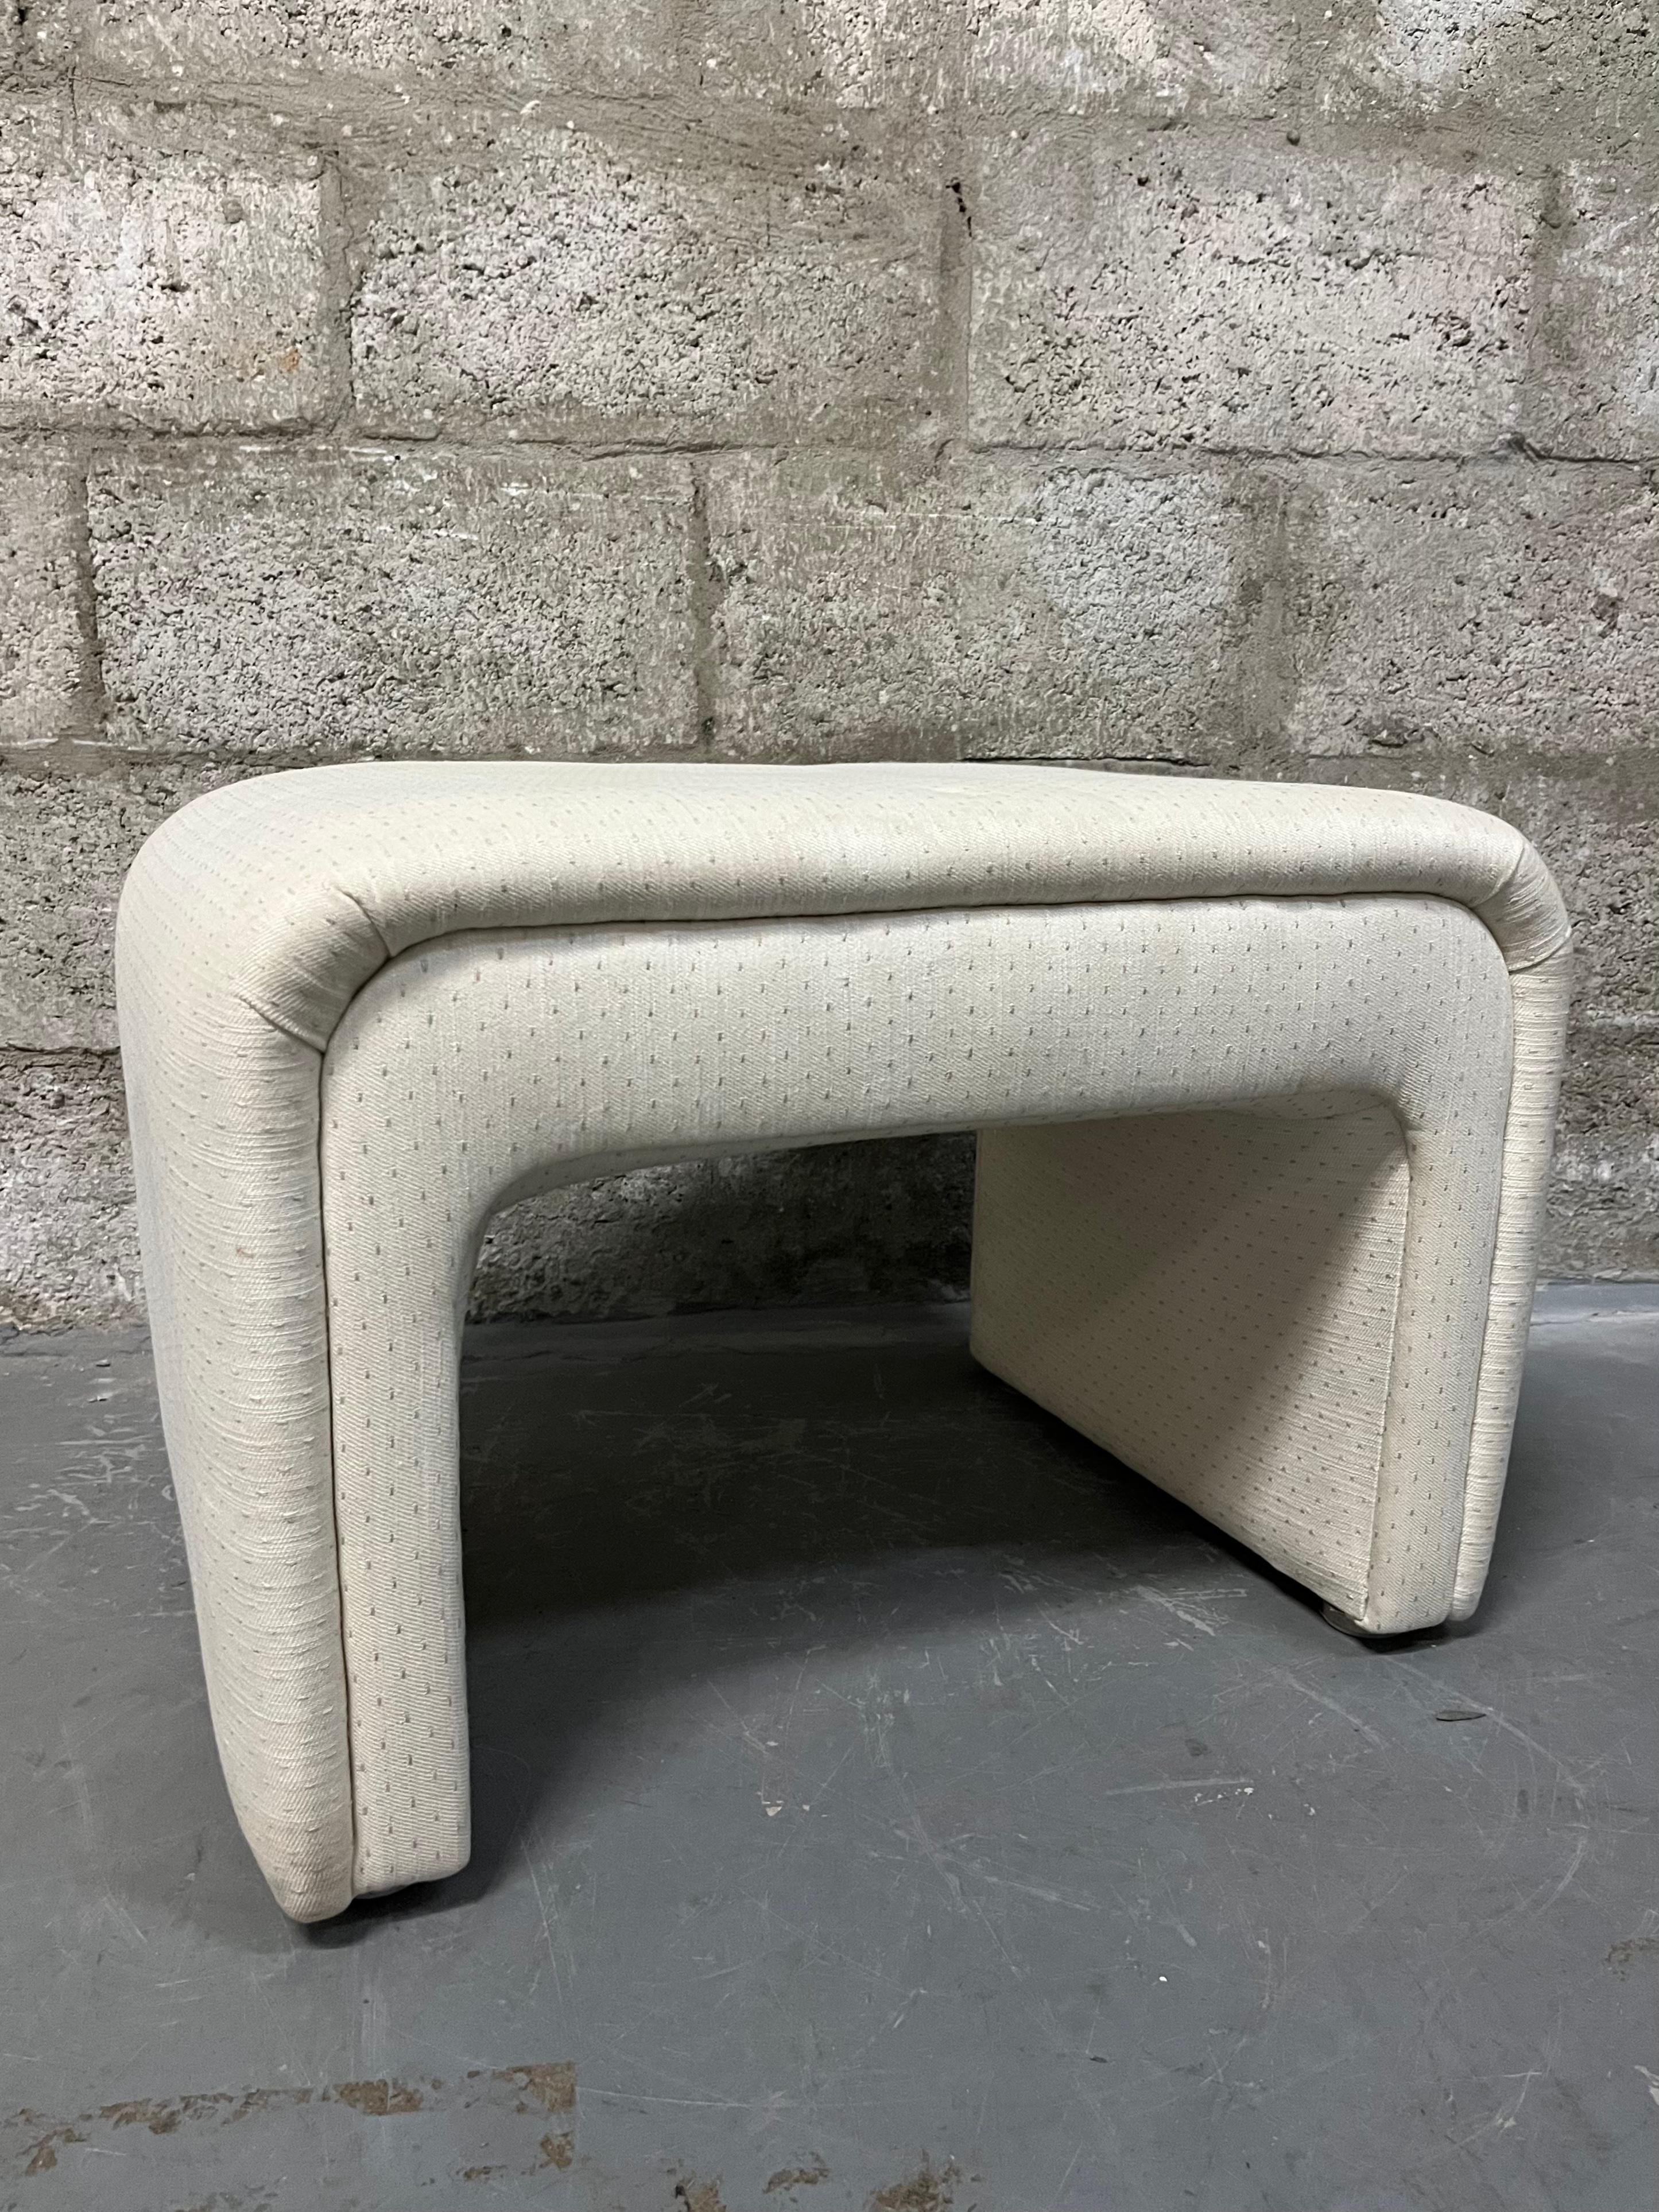 Vintage Postmodern / Art Deco Revival Upholstered Waterfall Bench by Thayer Coggin. Circa 1980s
Features the original cream color upholstery with soft pastel pinks and teals tones alternate stitching.
In good original cosmetic and sound condition